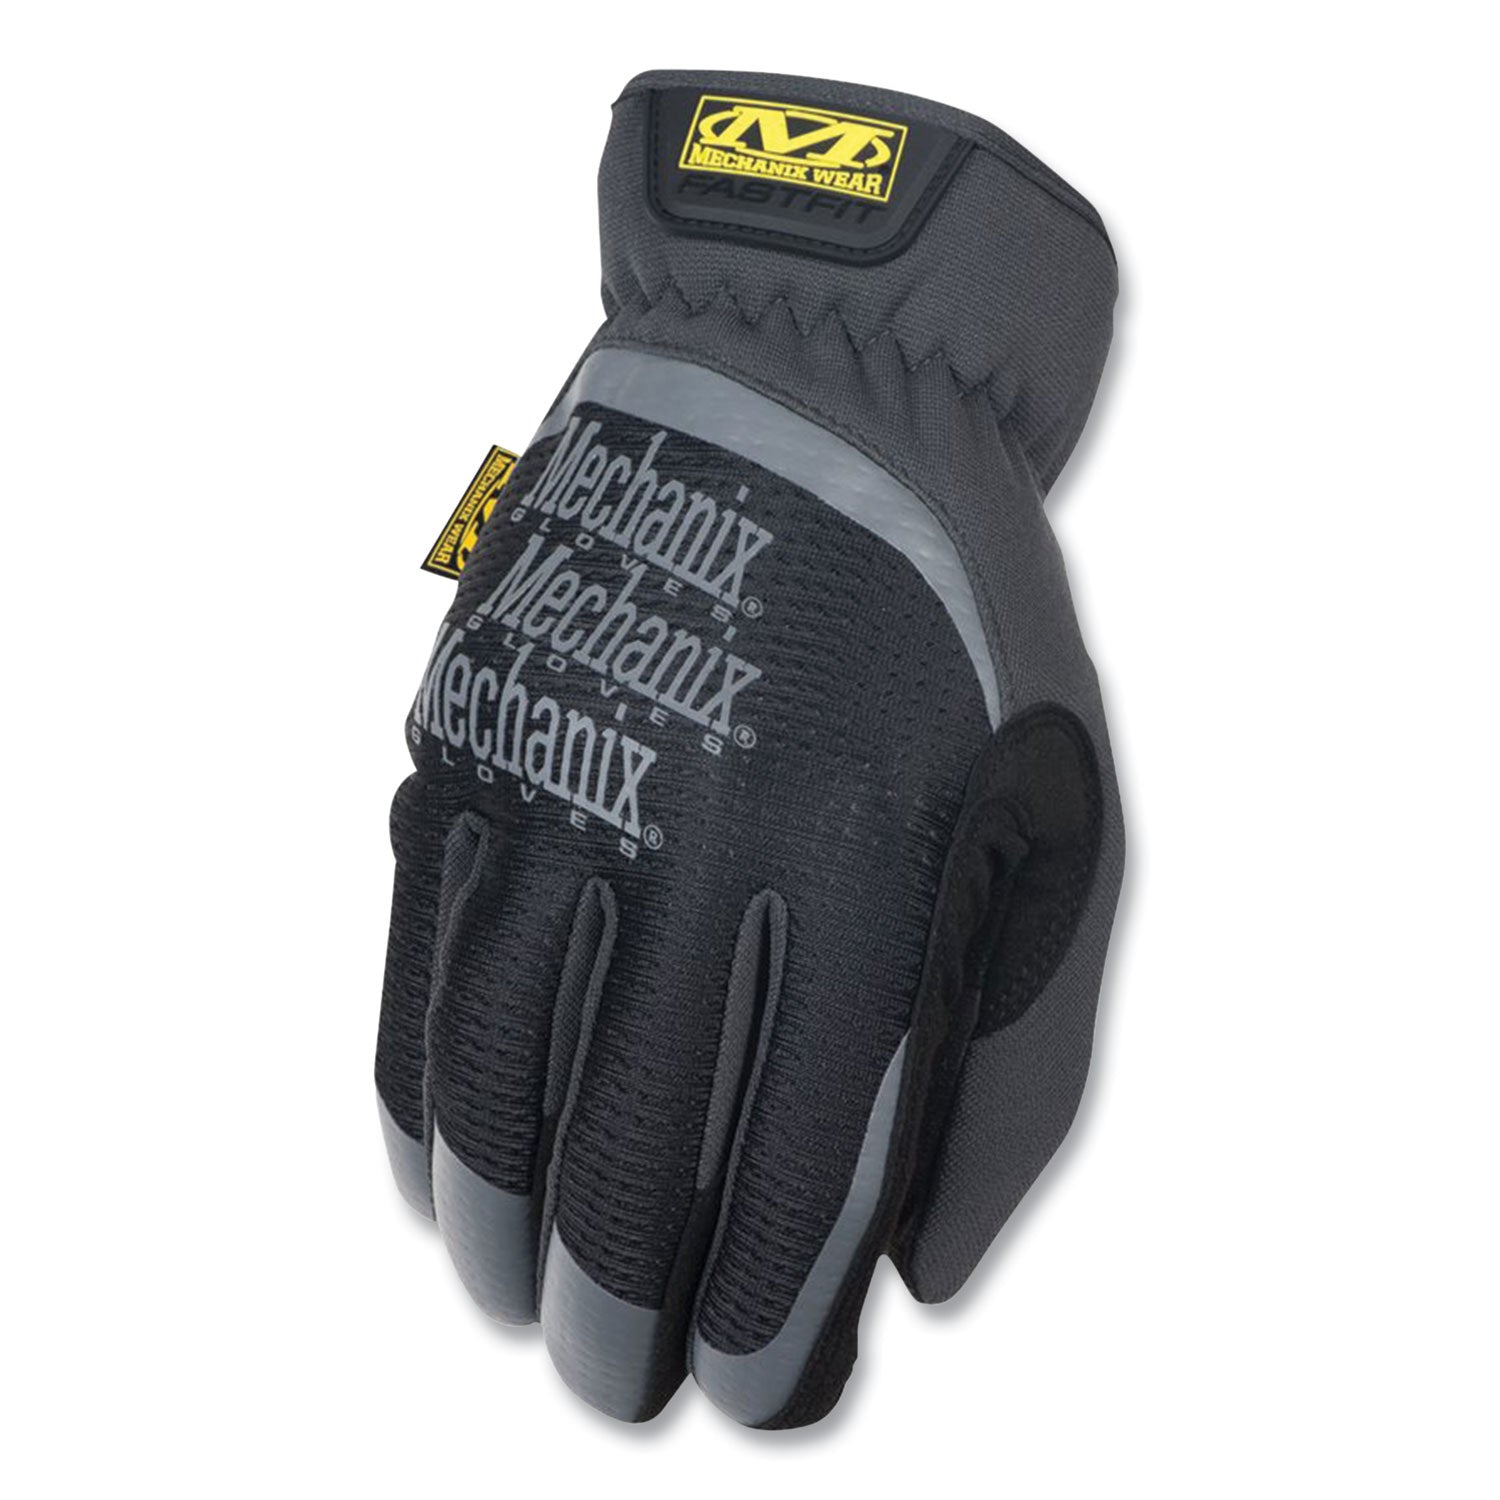 fastfit-work-gloves-black-gray-large_rtsmff05010 - 1